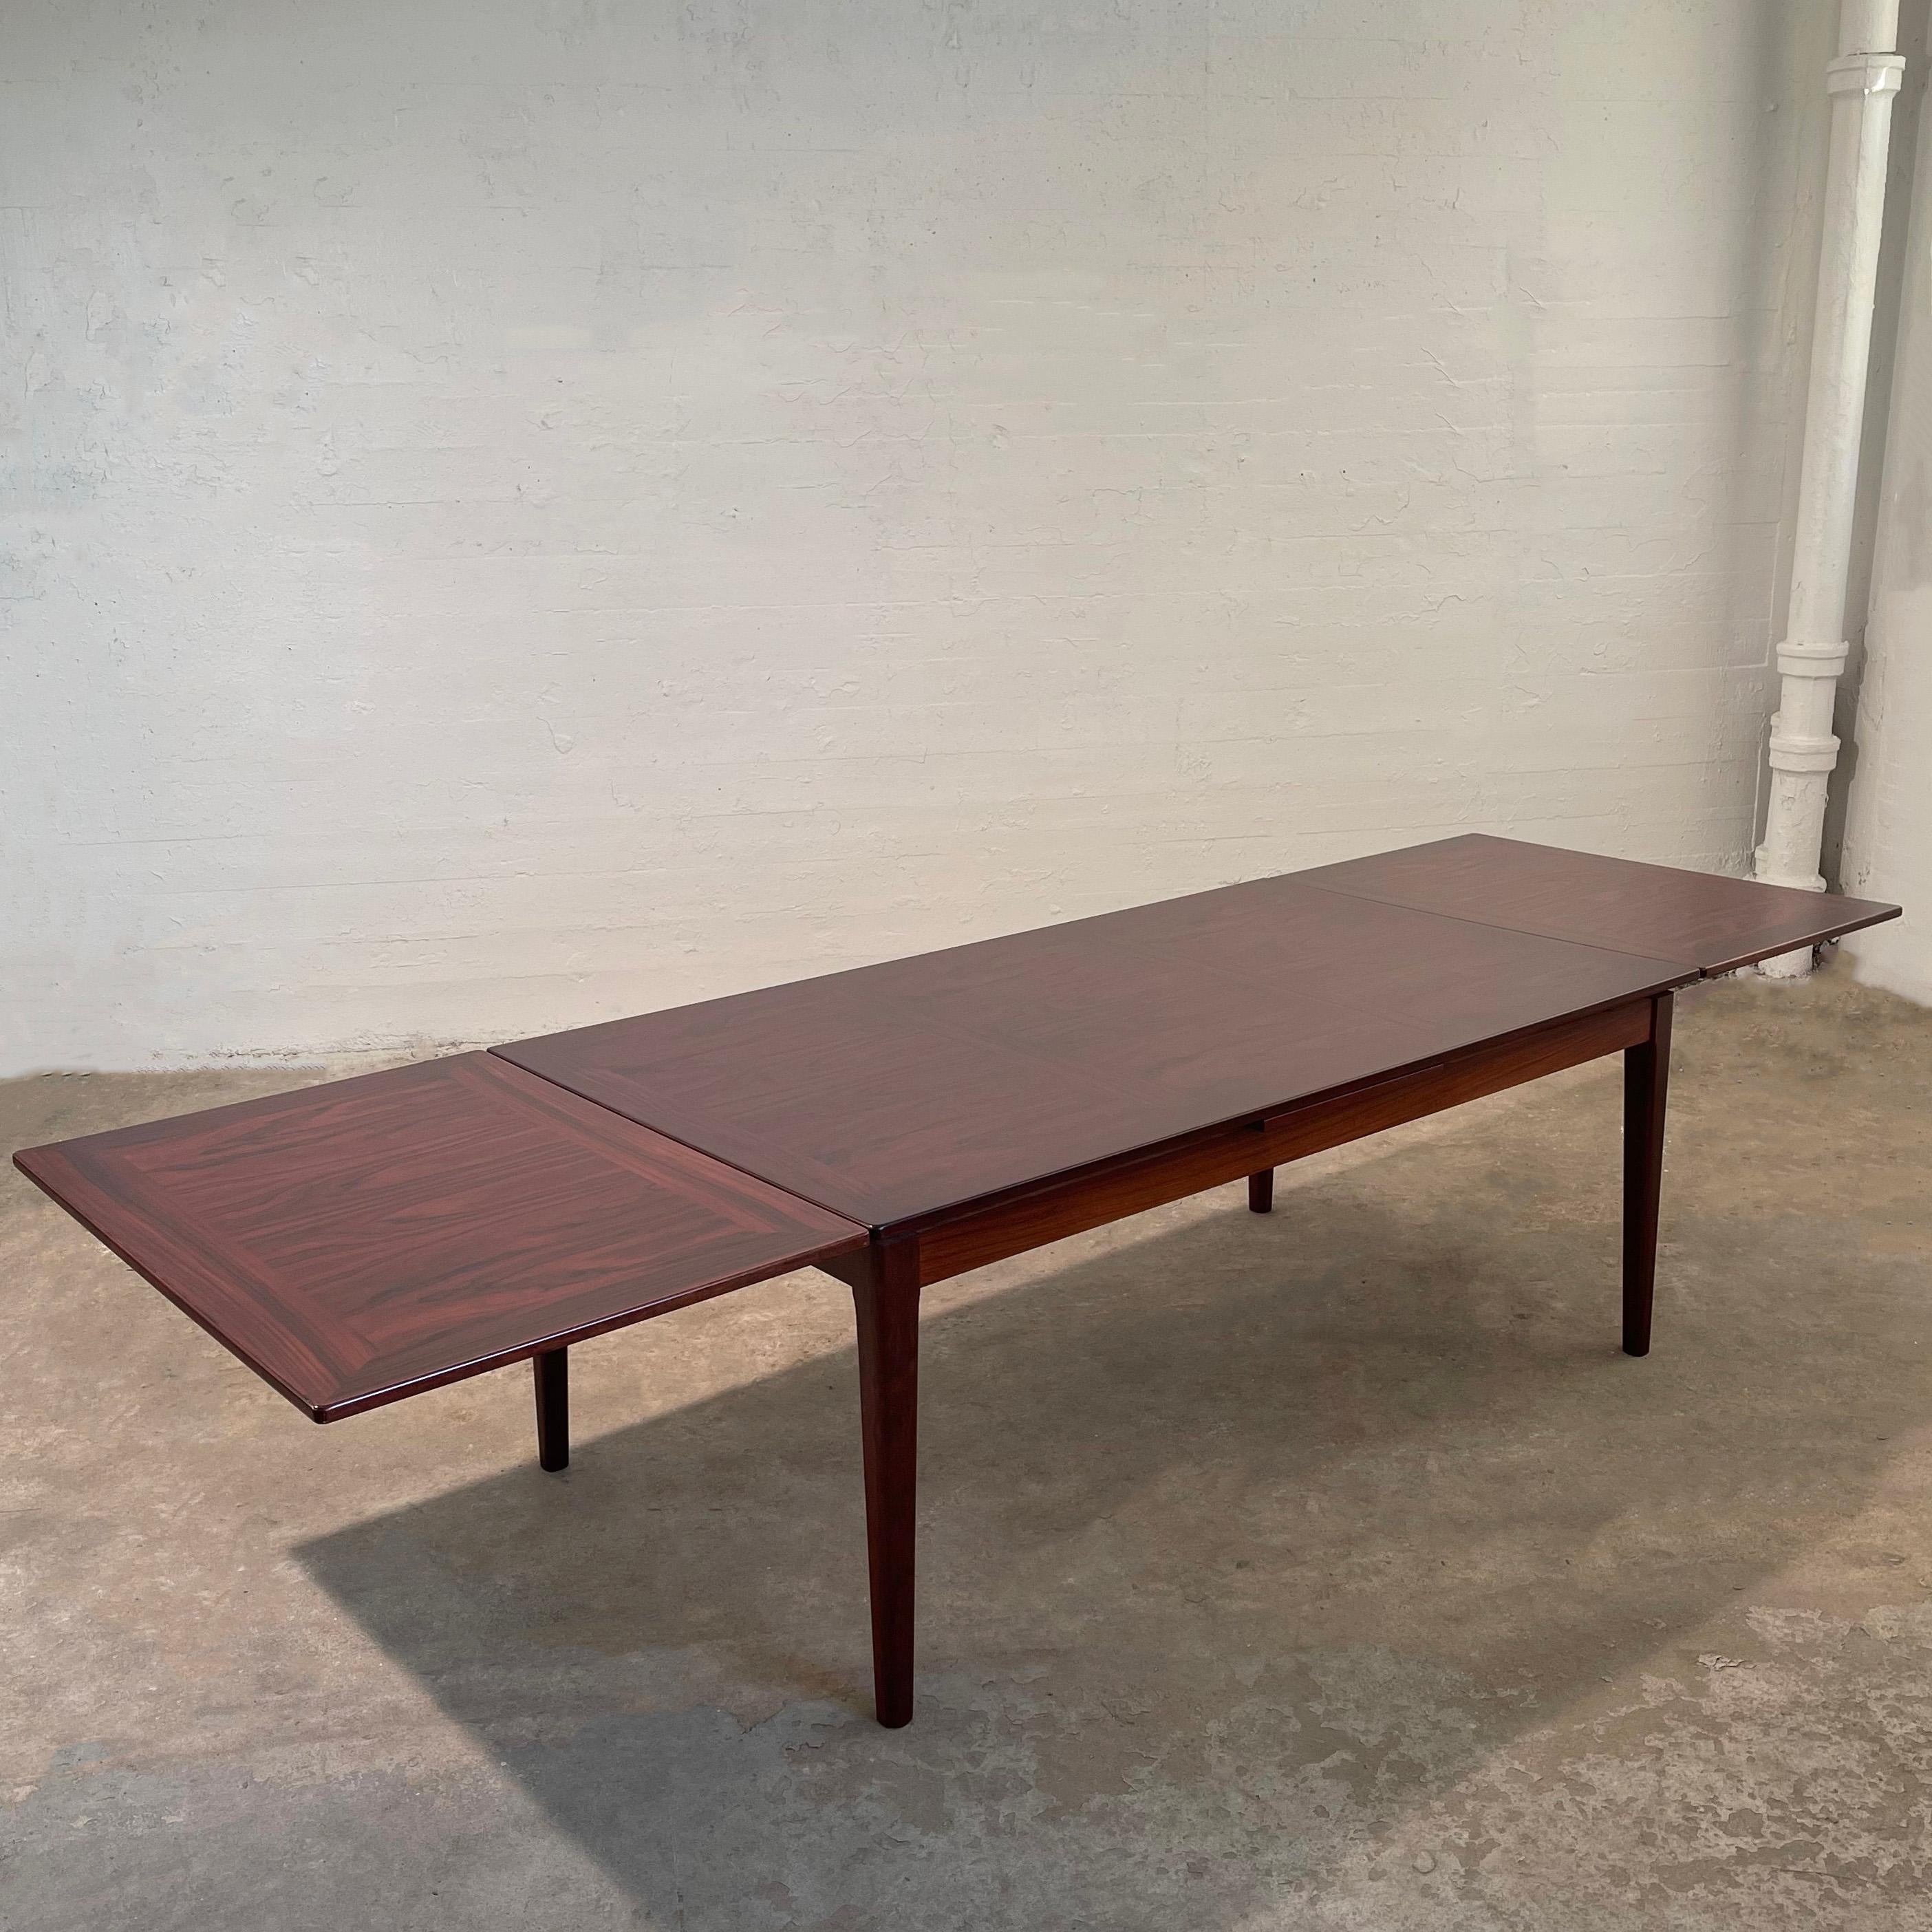 20th Century Scandinavian Modern Rosewood Extension Dining Table By Scovby Mobelfabrik For Sale